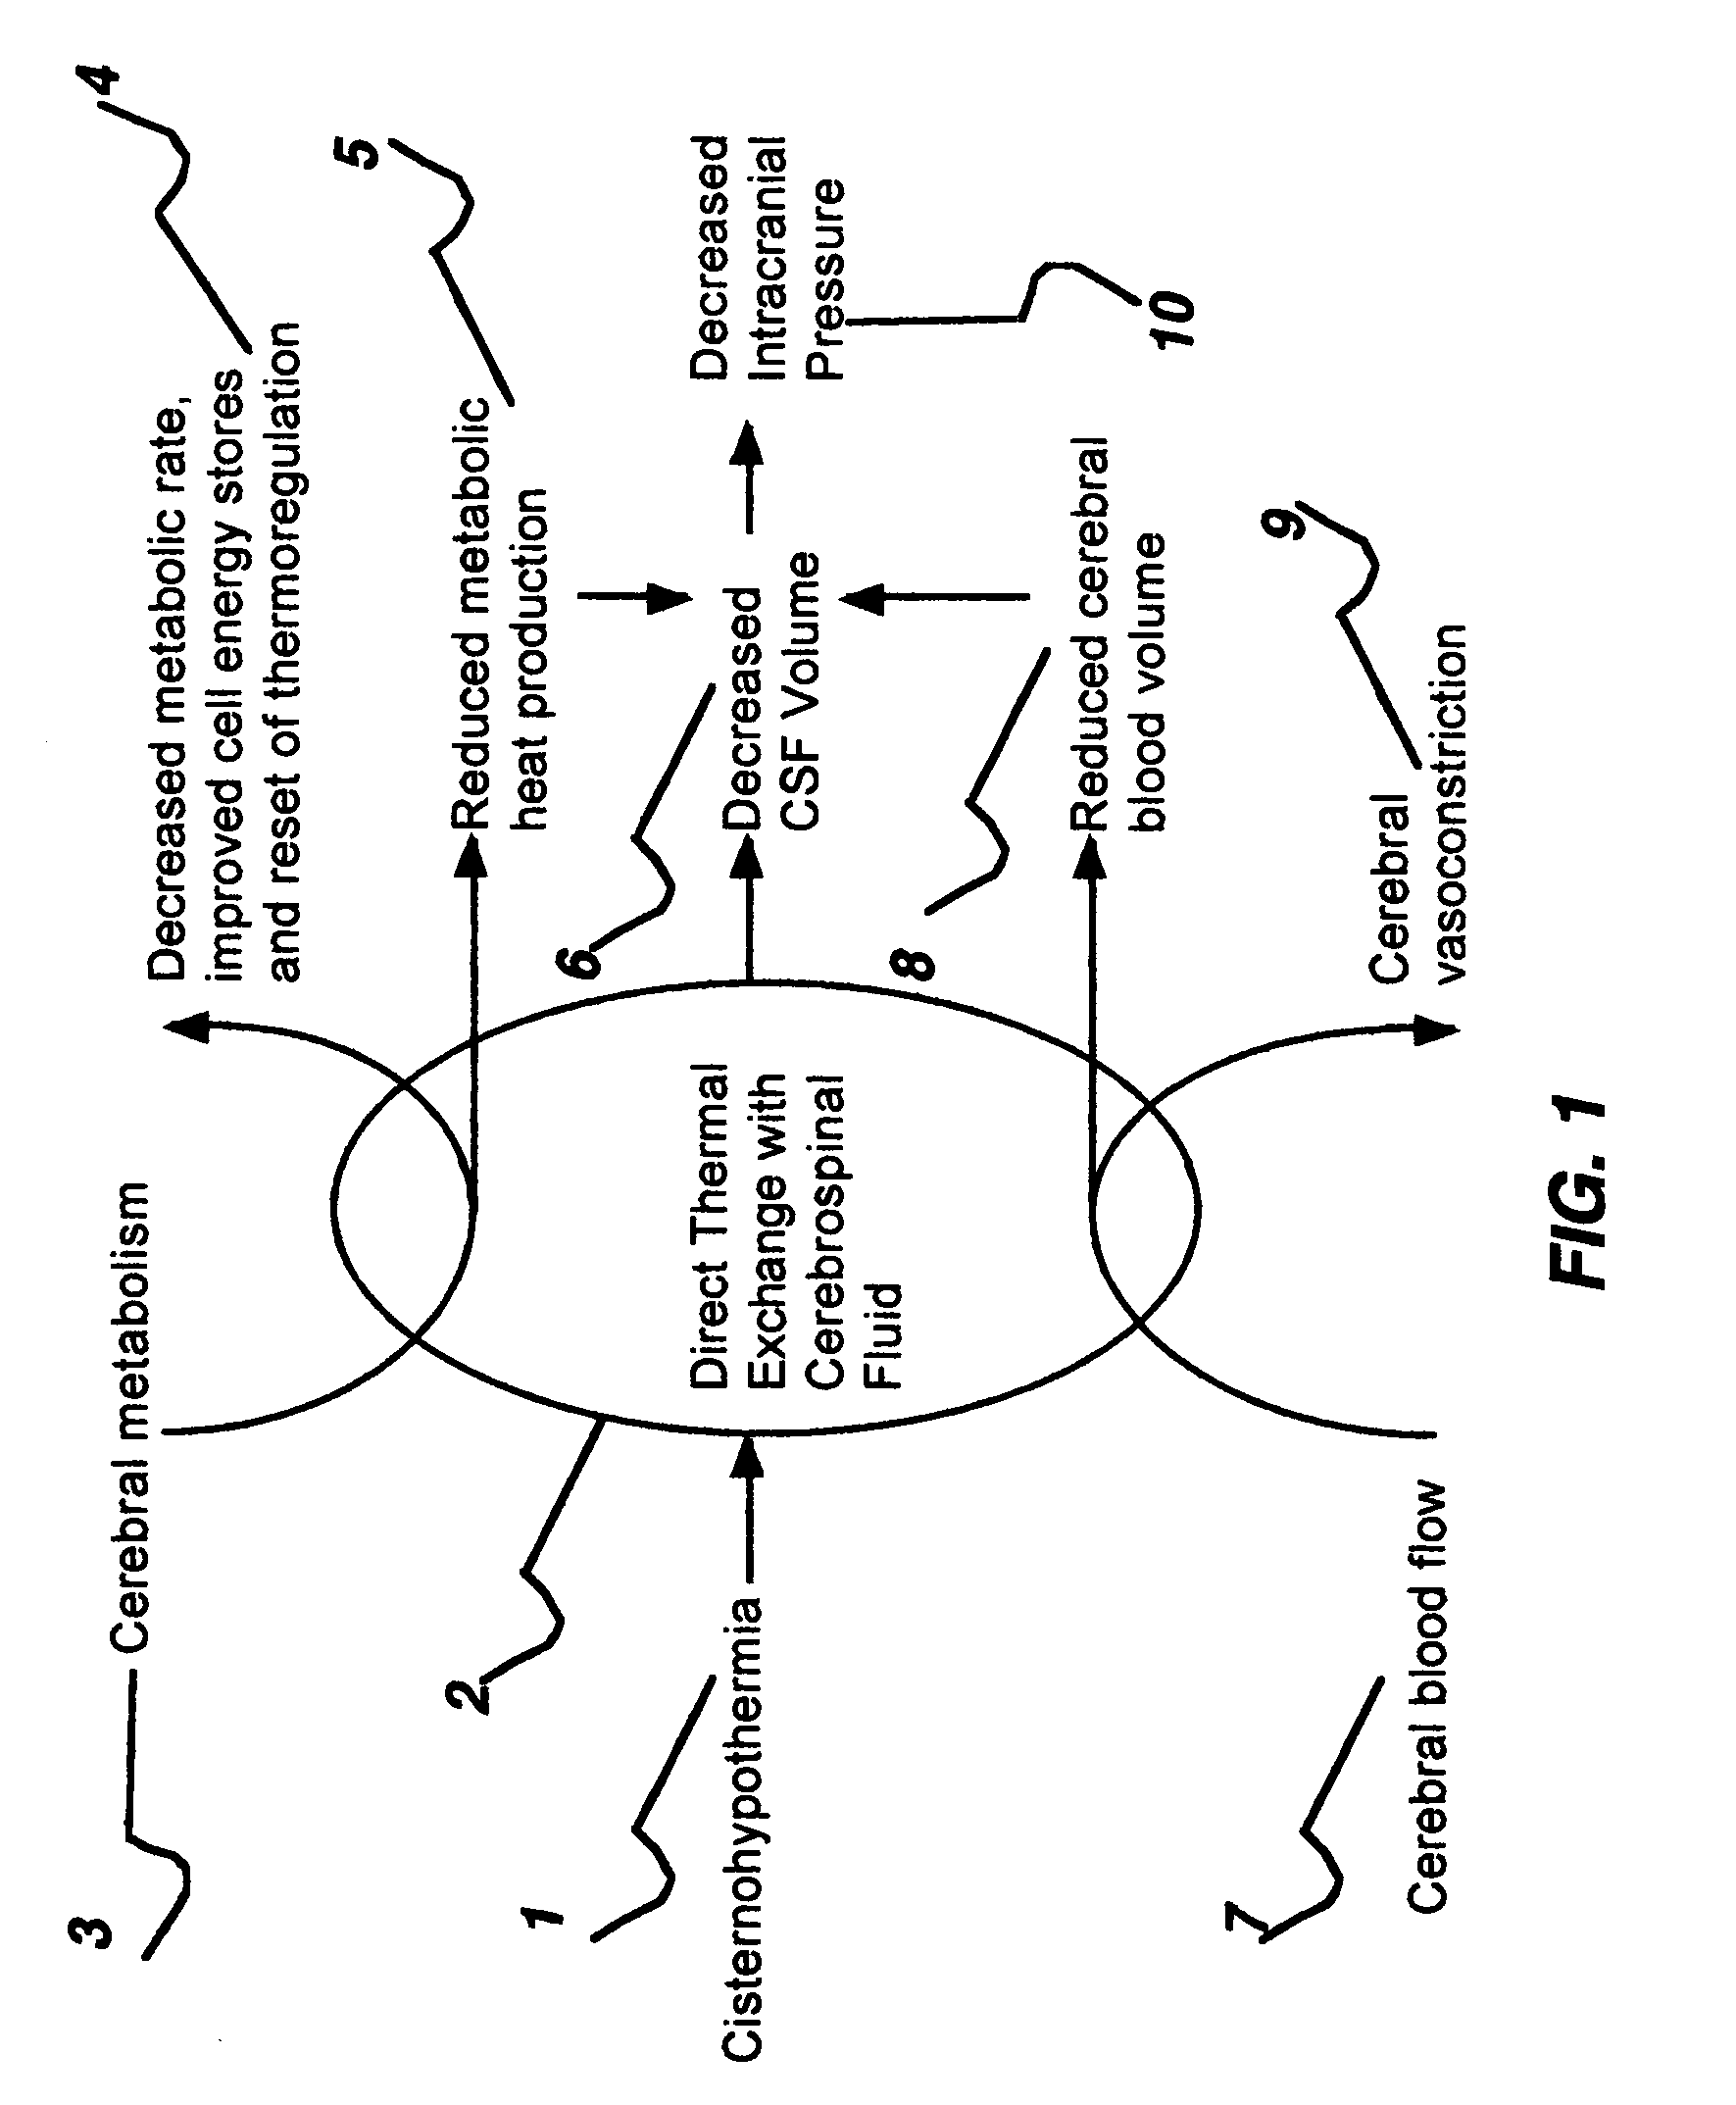 Apparatus and method for hypothermia and rewarming by altering the temperature of the cerebrospinal fluid in the brain